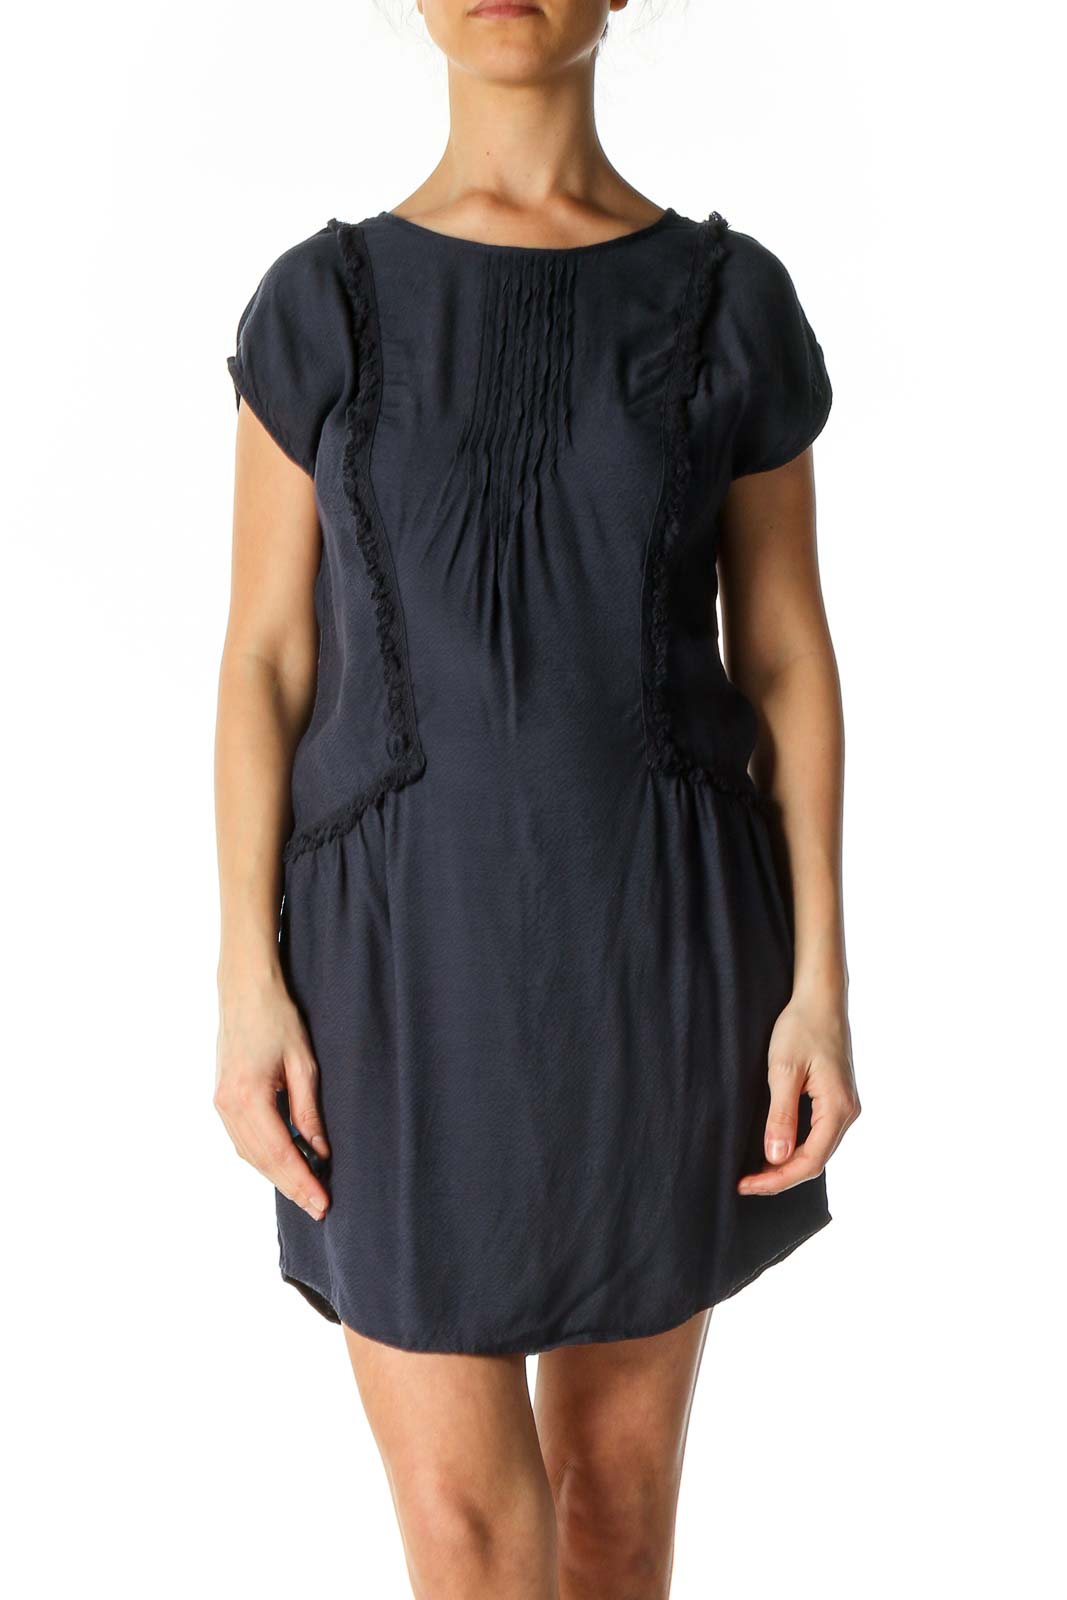 Blue Solid Casual Shift Dress Front